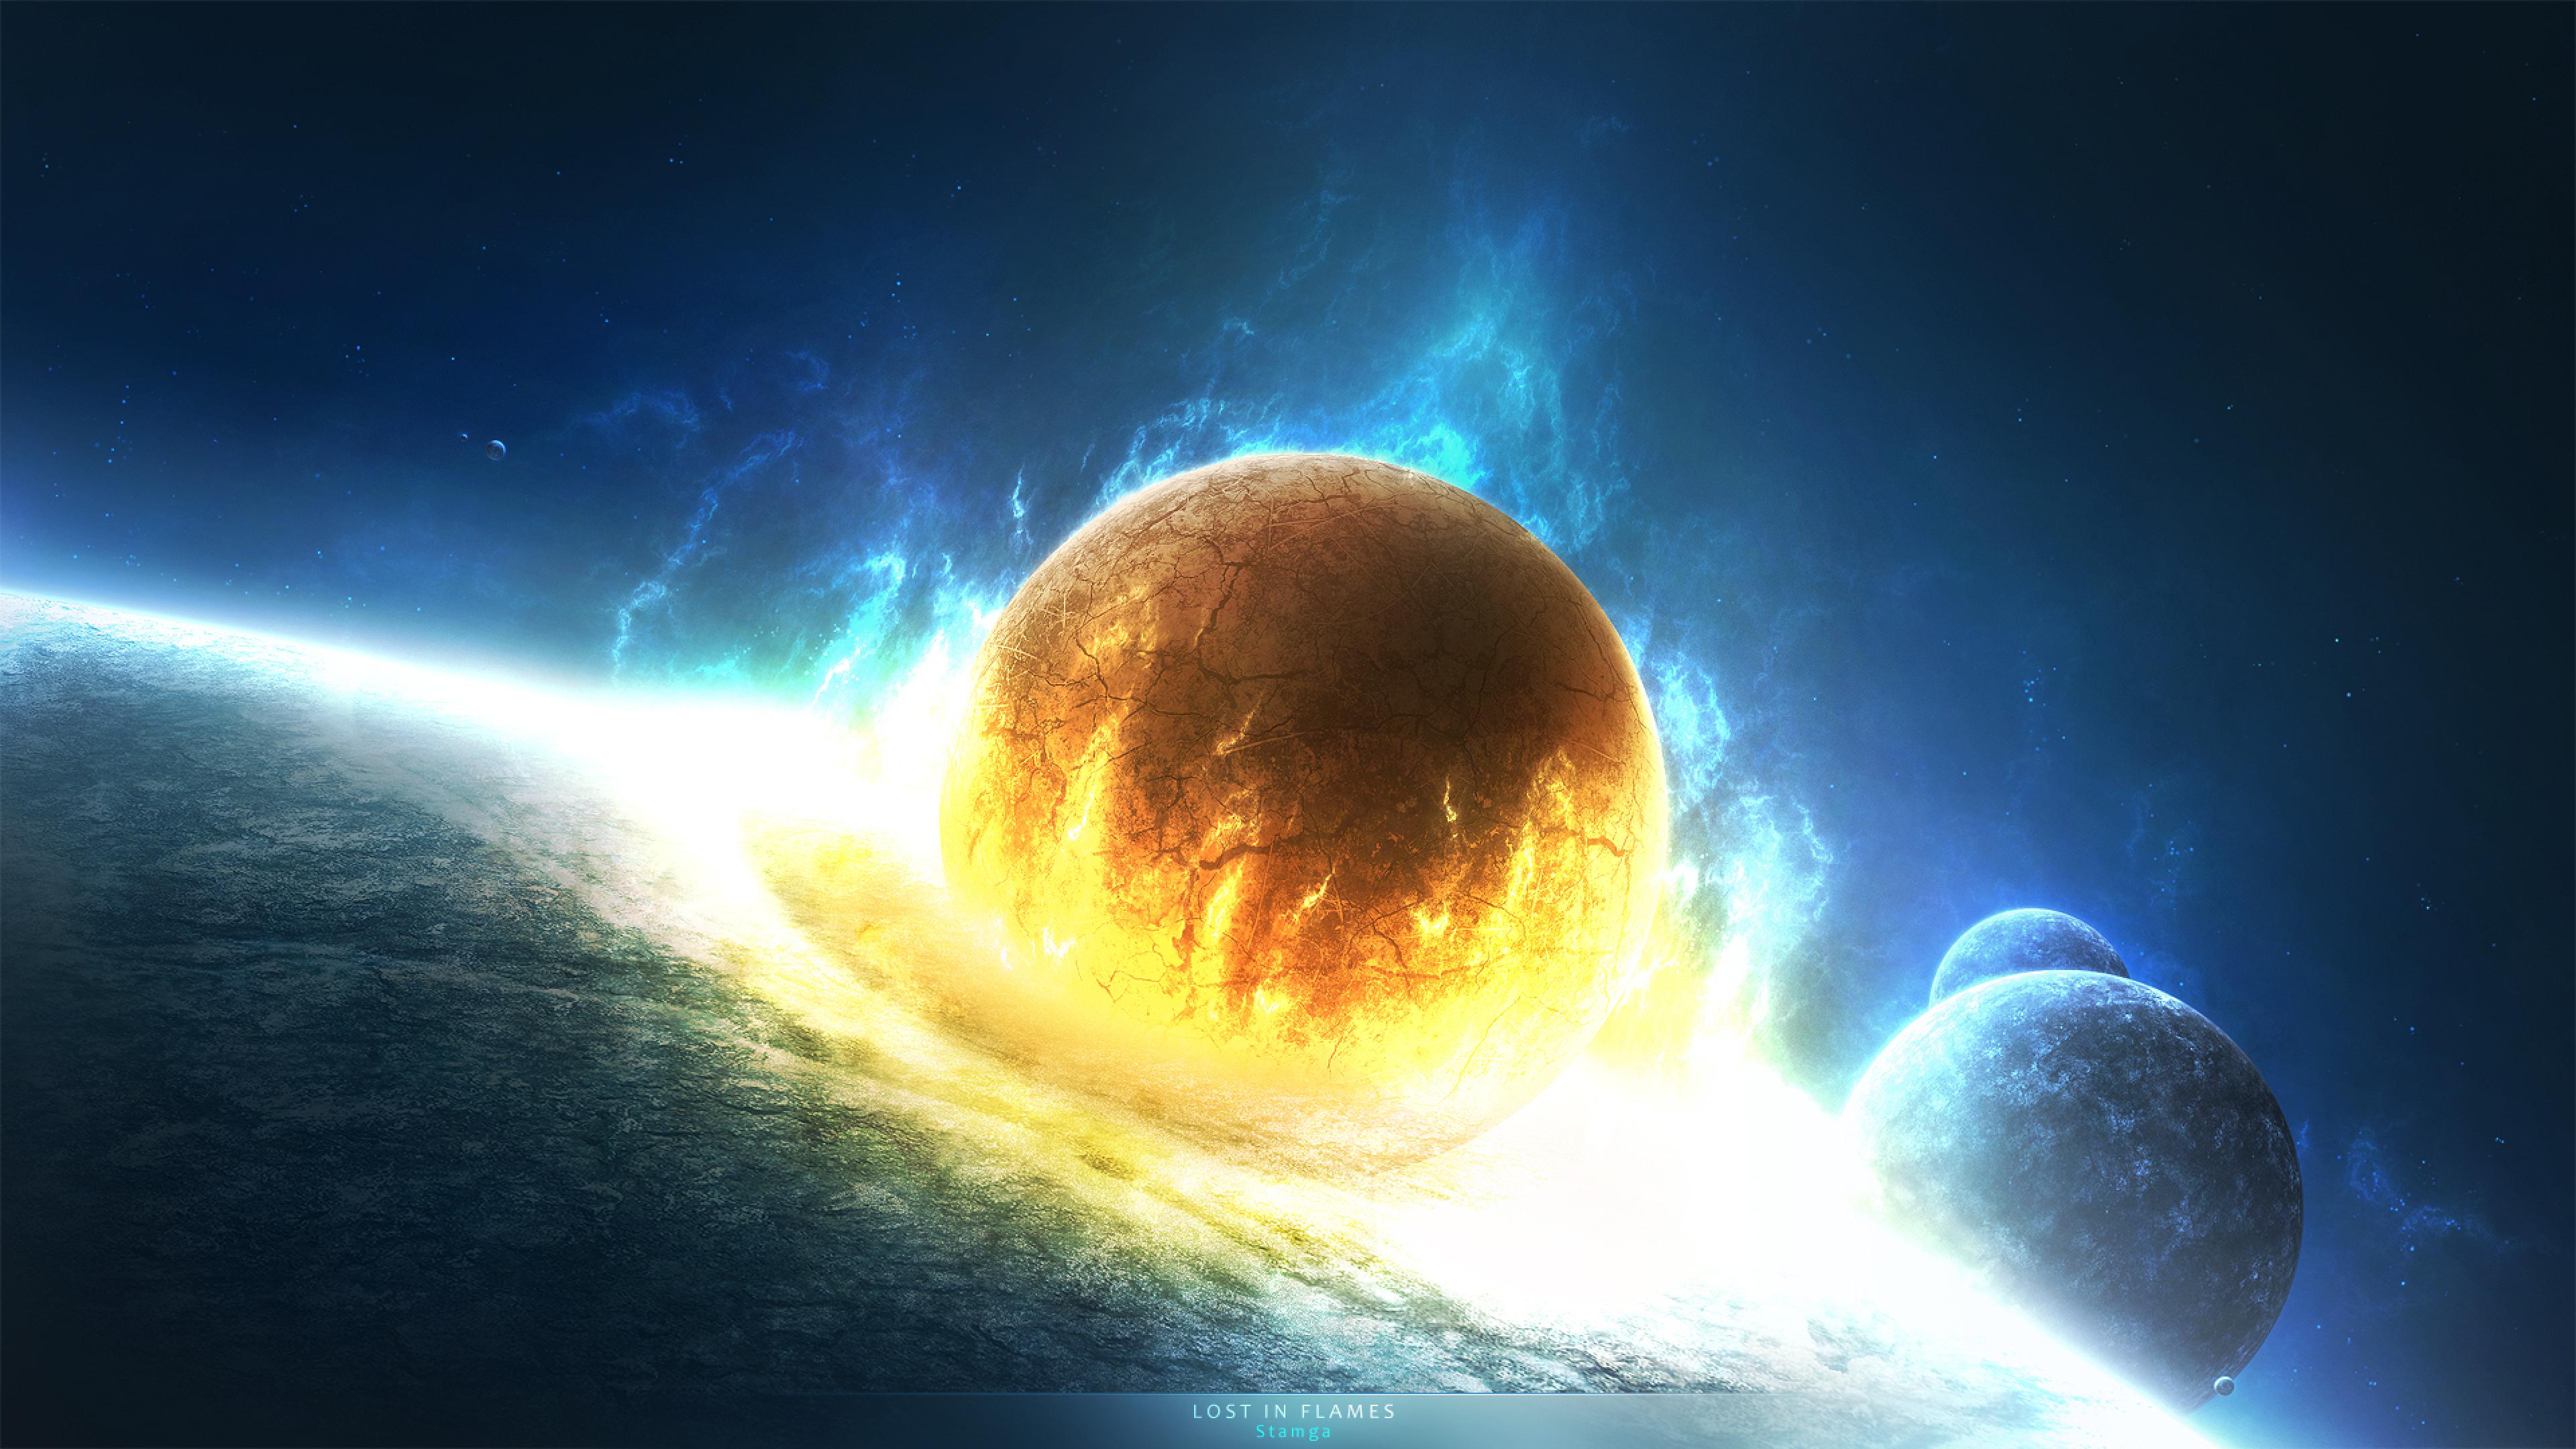 Wallpaper clash asteroid planet cataclysm explosion wave free